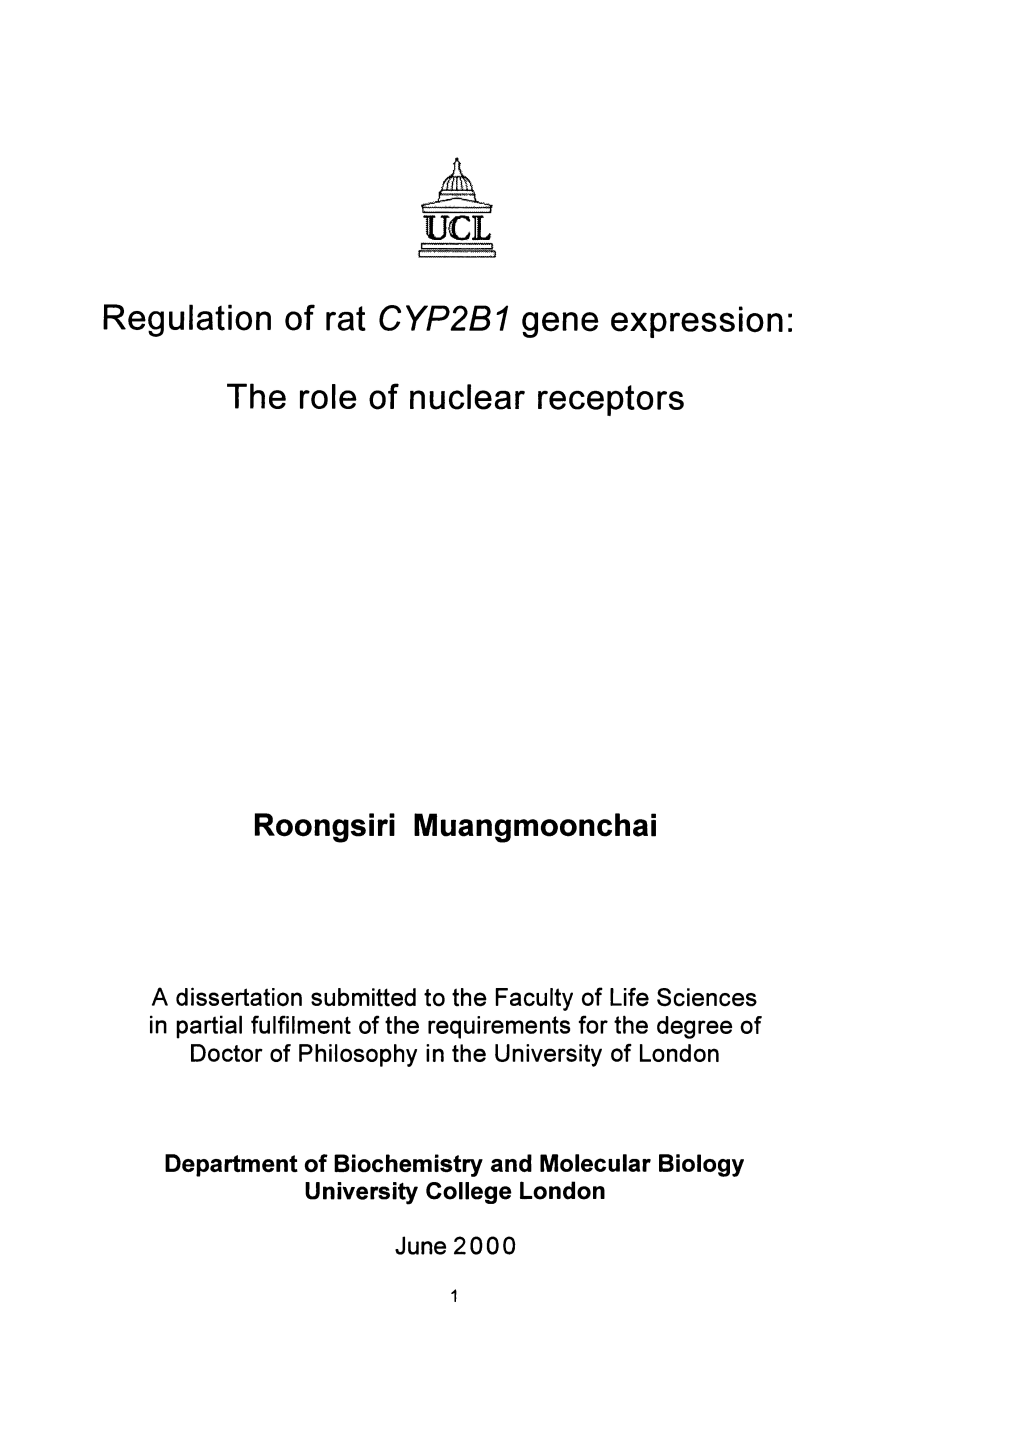 Regulation of Rat CYP2B1 Gene Expression: the Role of Nuclear